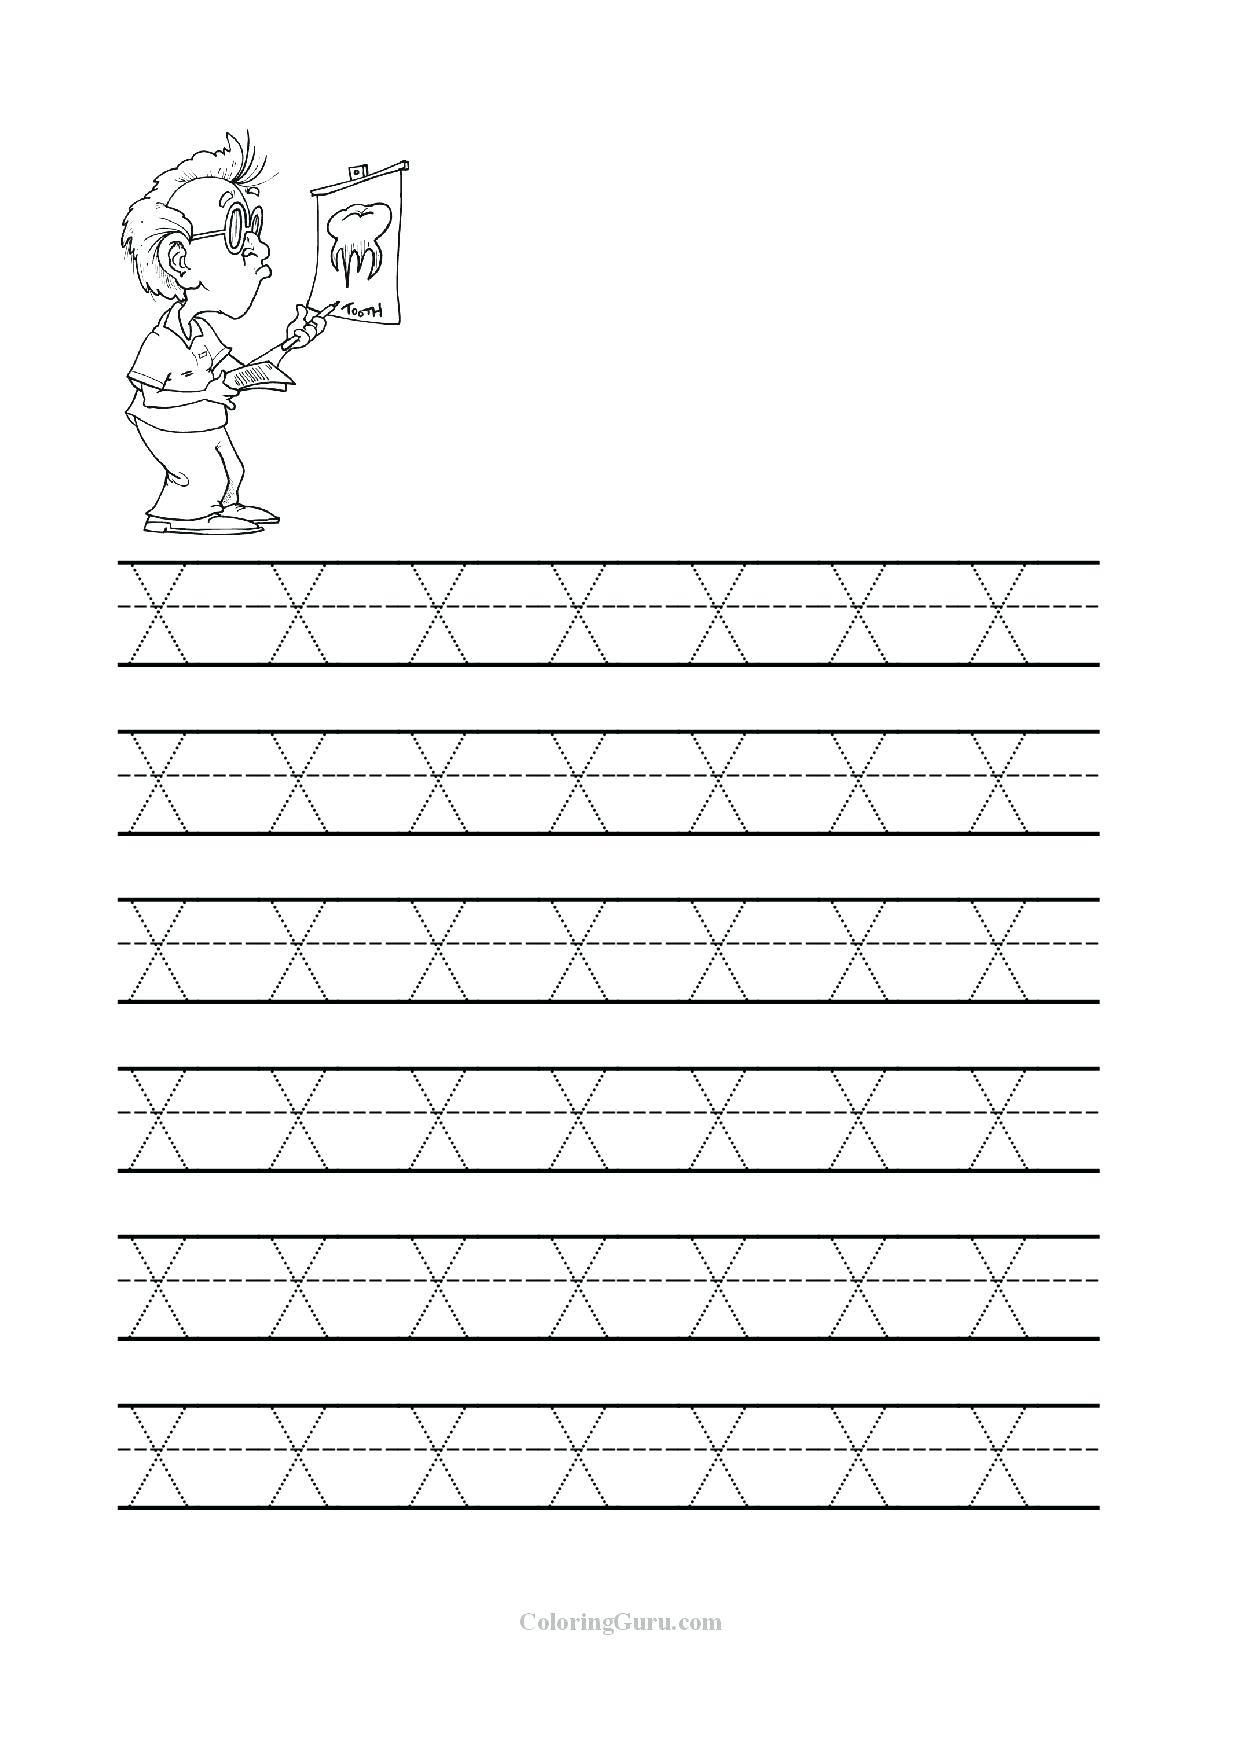 Coloring Book : Tracing Letter Worksheets Preschoolree Trace throughout Tracing Letters Make Your Own